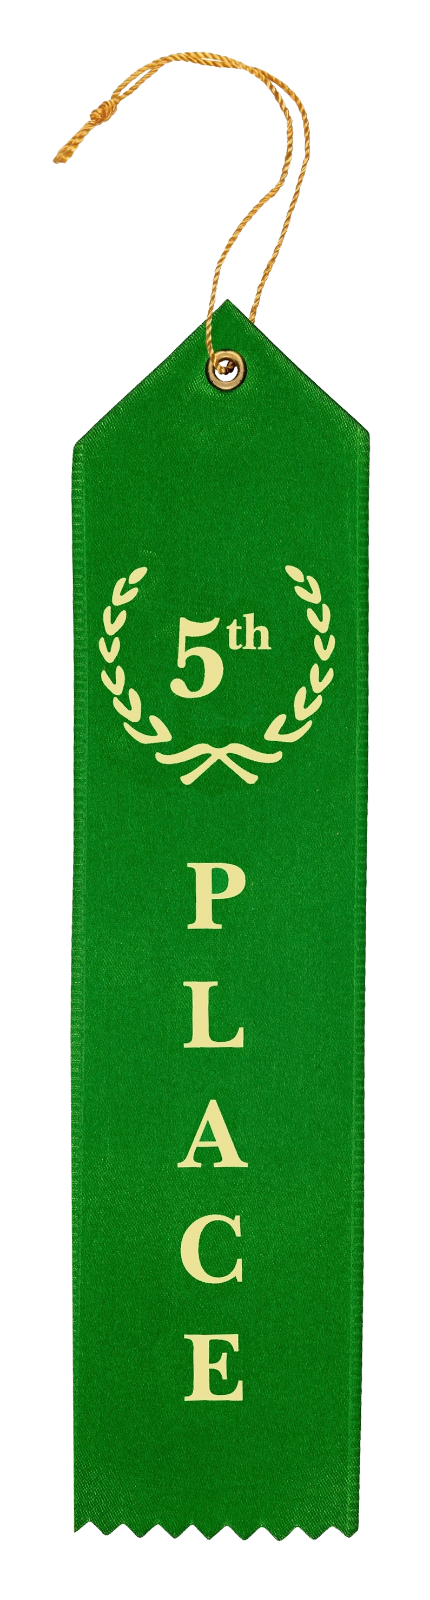 Flat Carded Award Ribbons 1st 2nd 3rd 4th 5th Place, Blue Red White Yellow Green Clinch Star CS-AR-FWC-1-5-60 - фотография #8